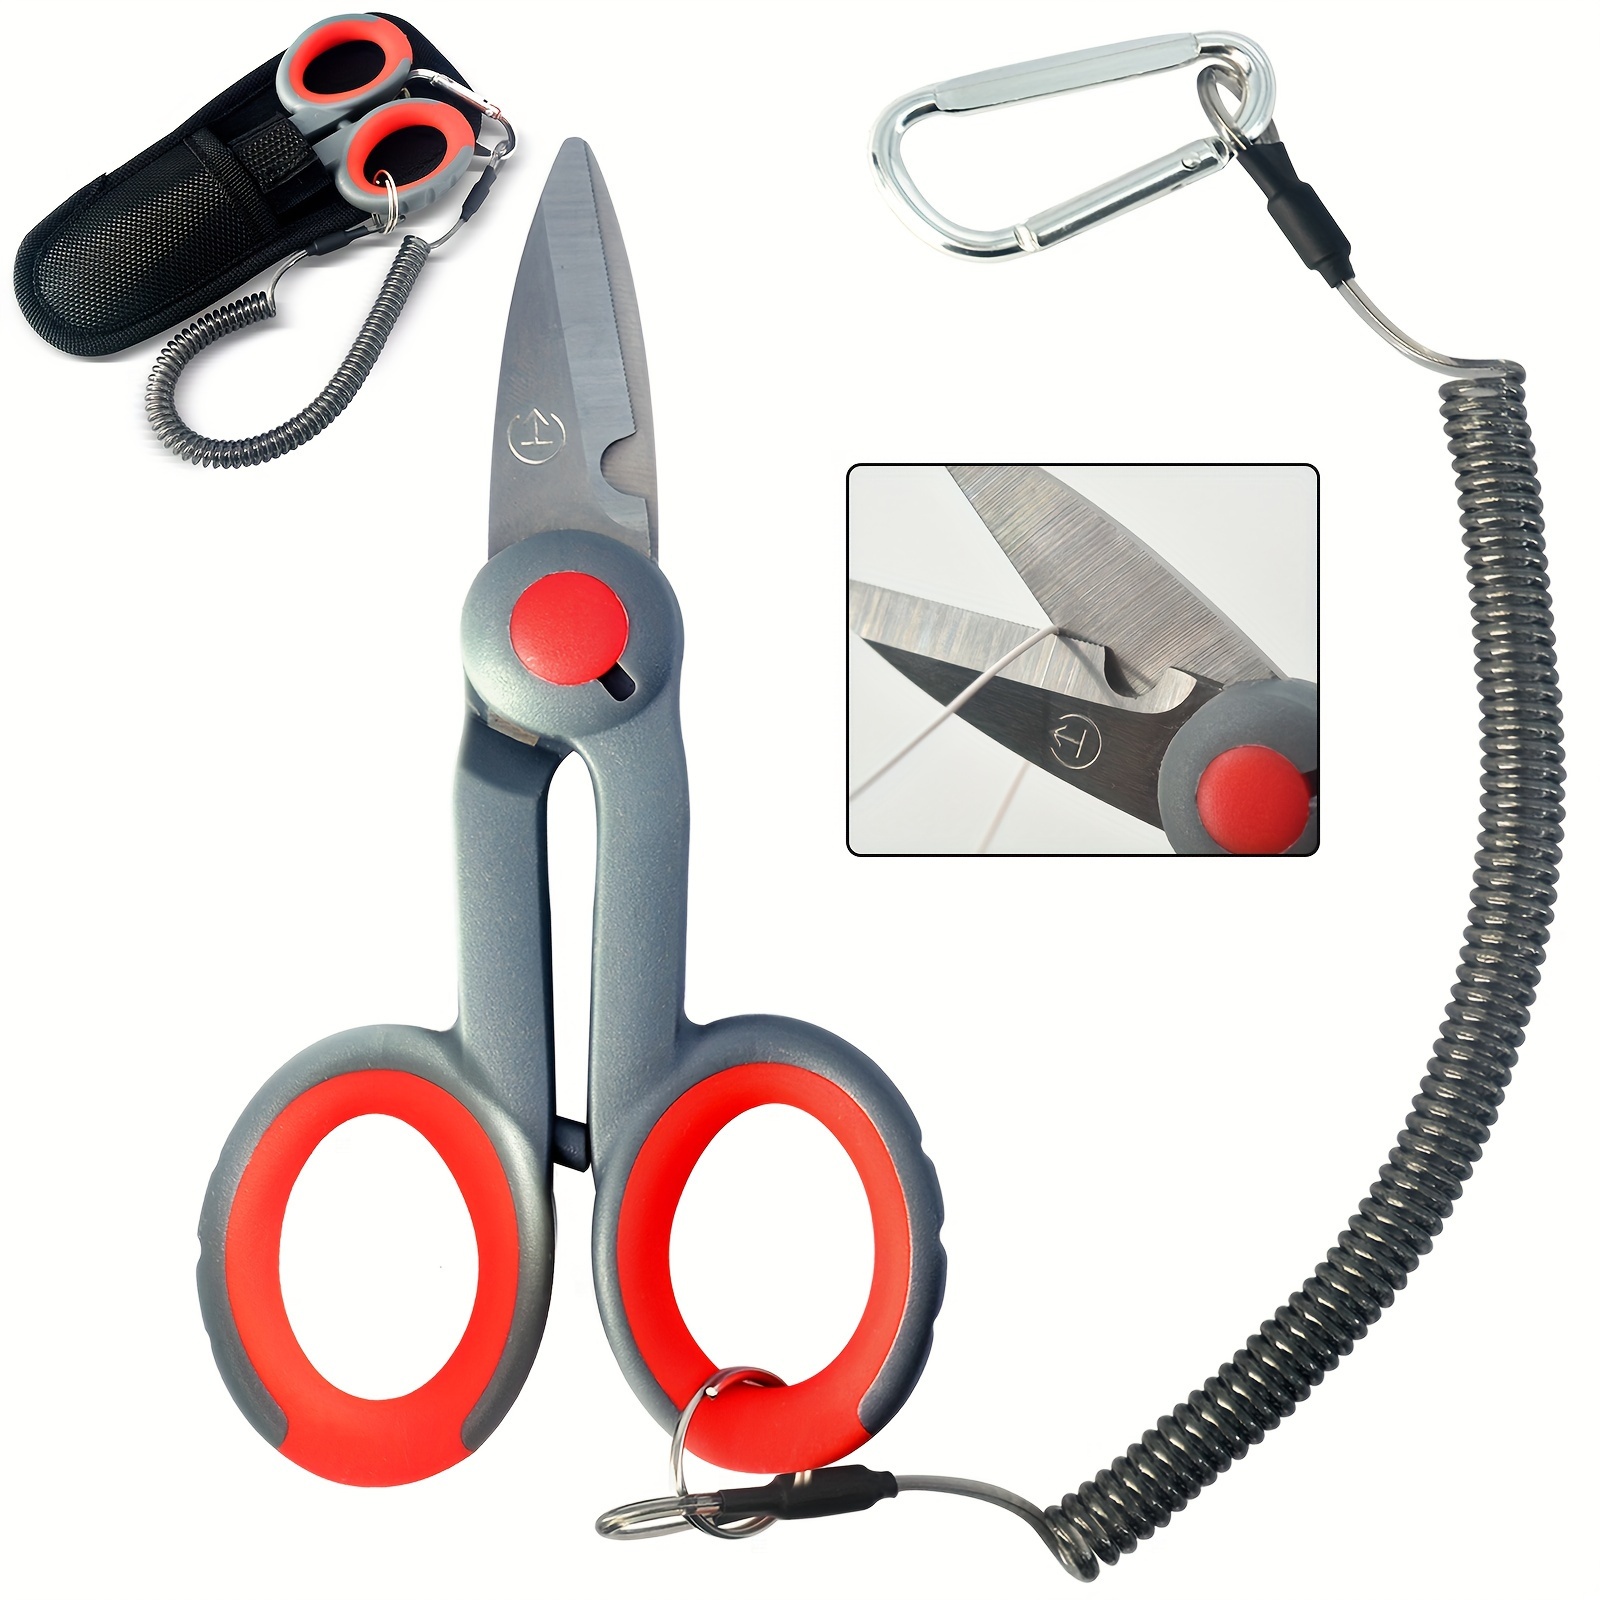 

5.7 Inches Industrial Scissors, Lightweight To Carry, Stianless Steel Blade Shear, With Spring Coil Safety Lanyard